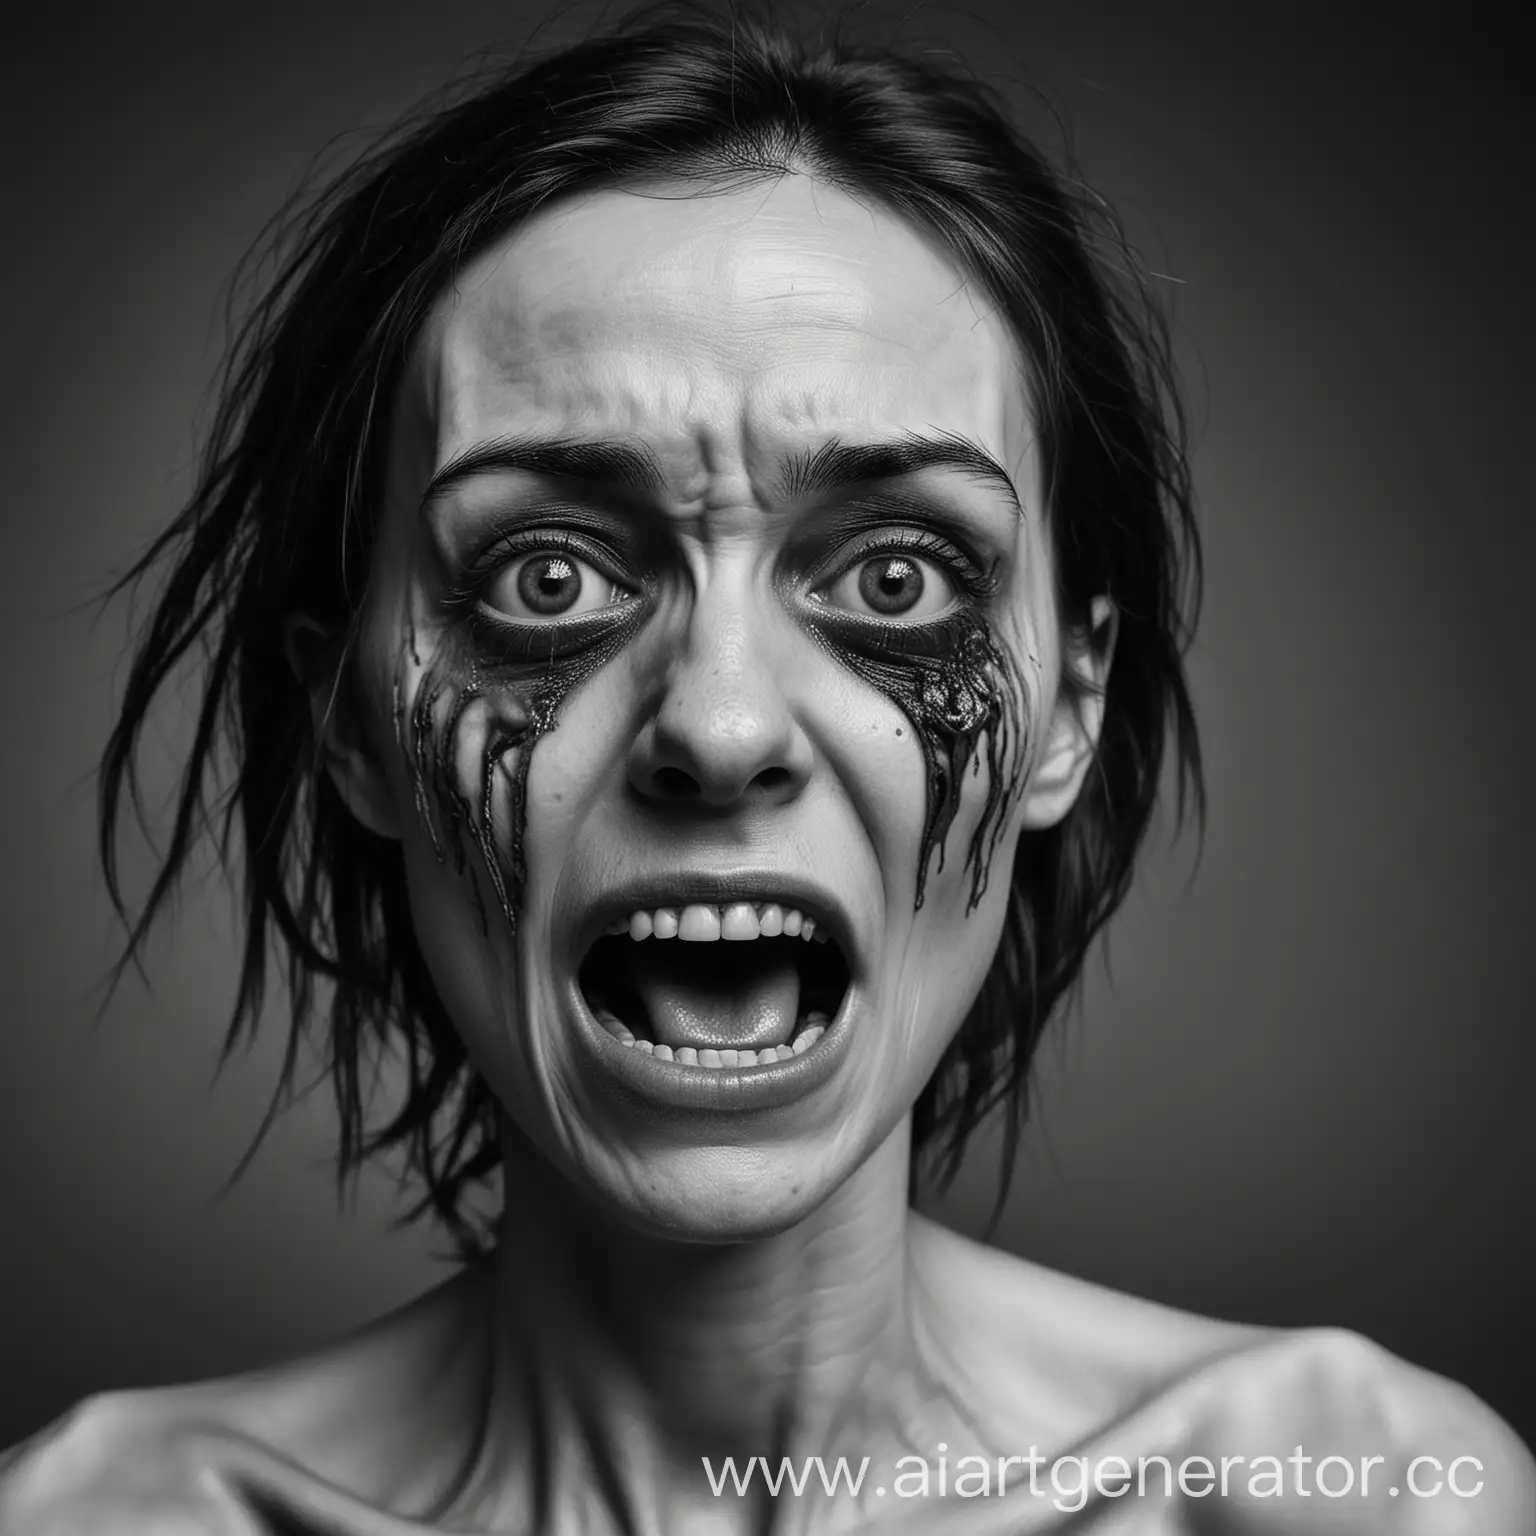 Emaciated-Person-Screaming-with-Piercing-Black-and-White-Eyes